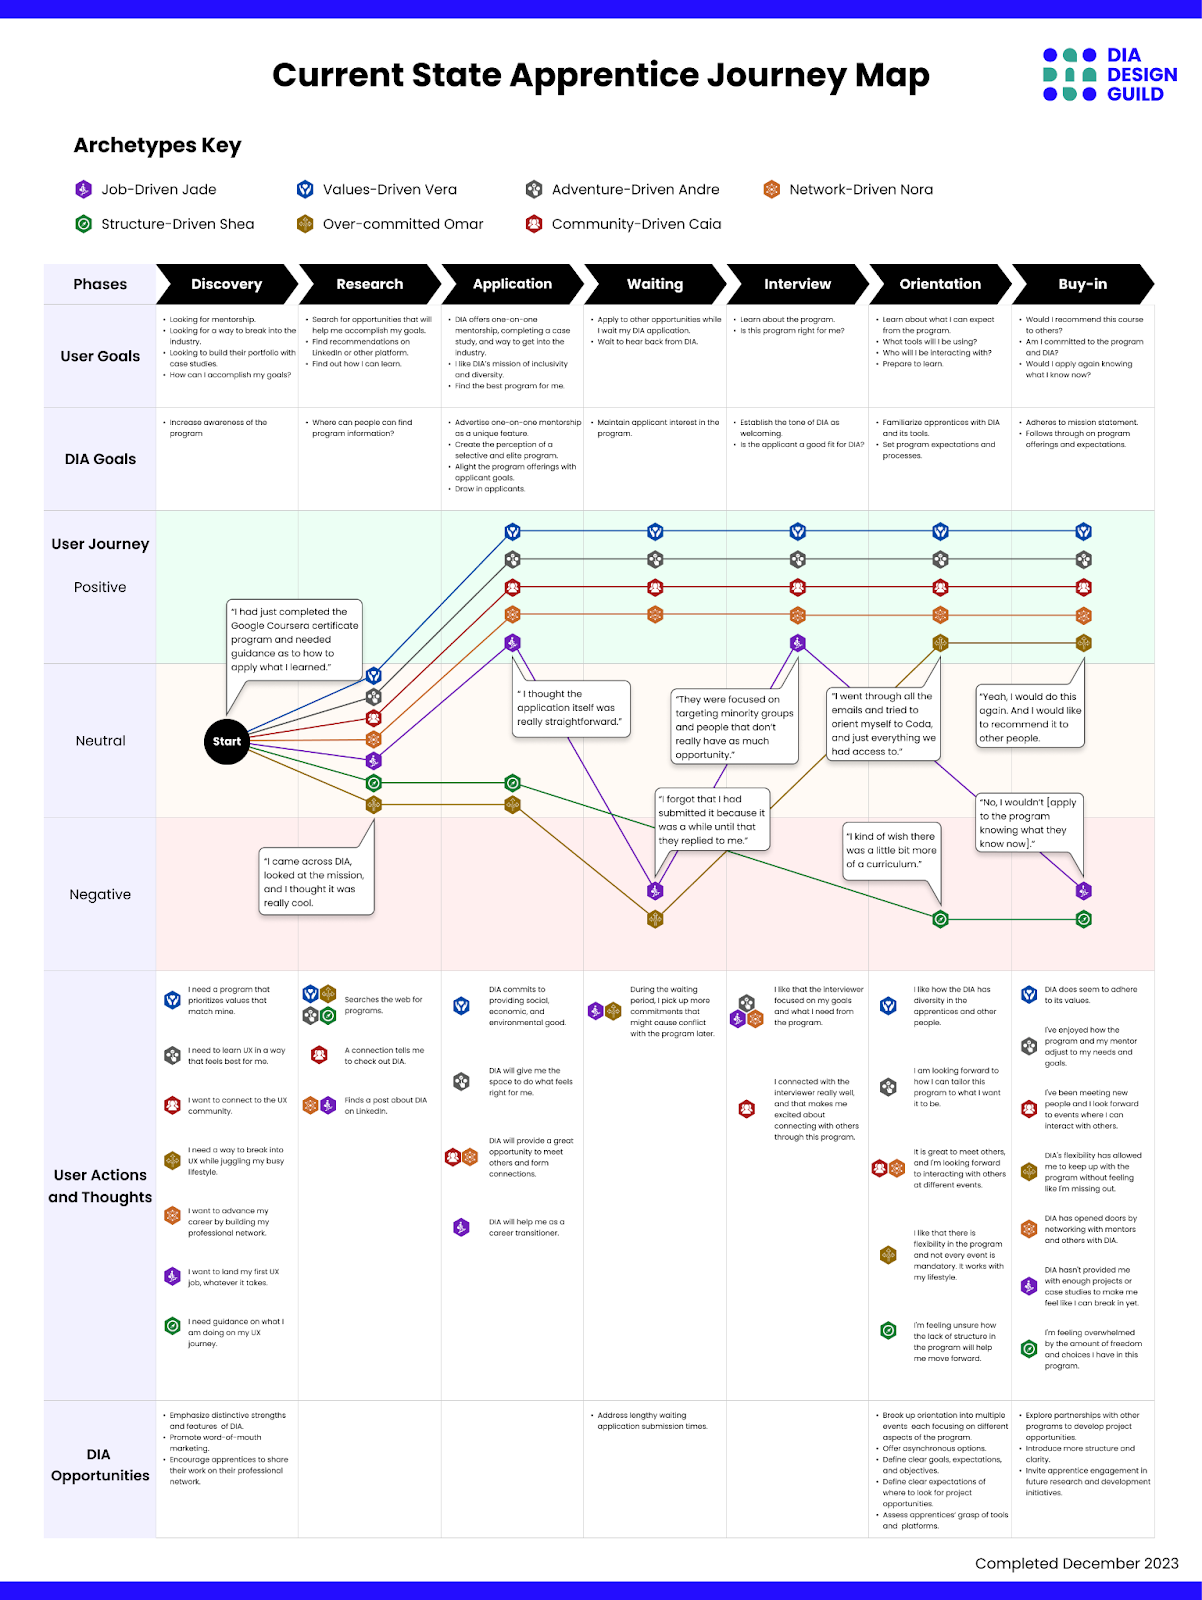 A journey map showing each archetype’s experience with the phases of applying and onboarding for the program, and the positive, negative, or neutral experiences for each.